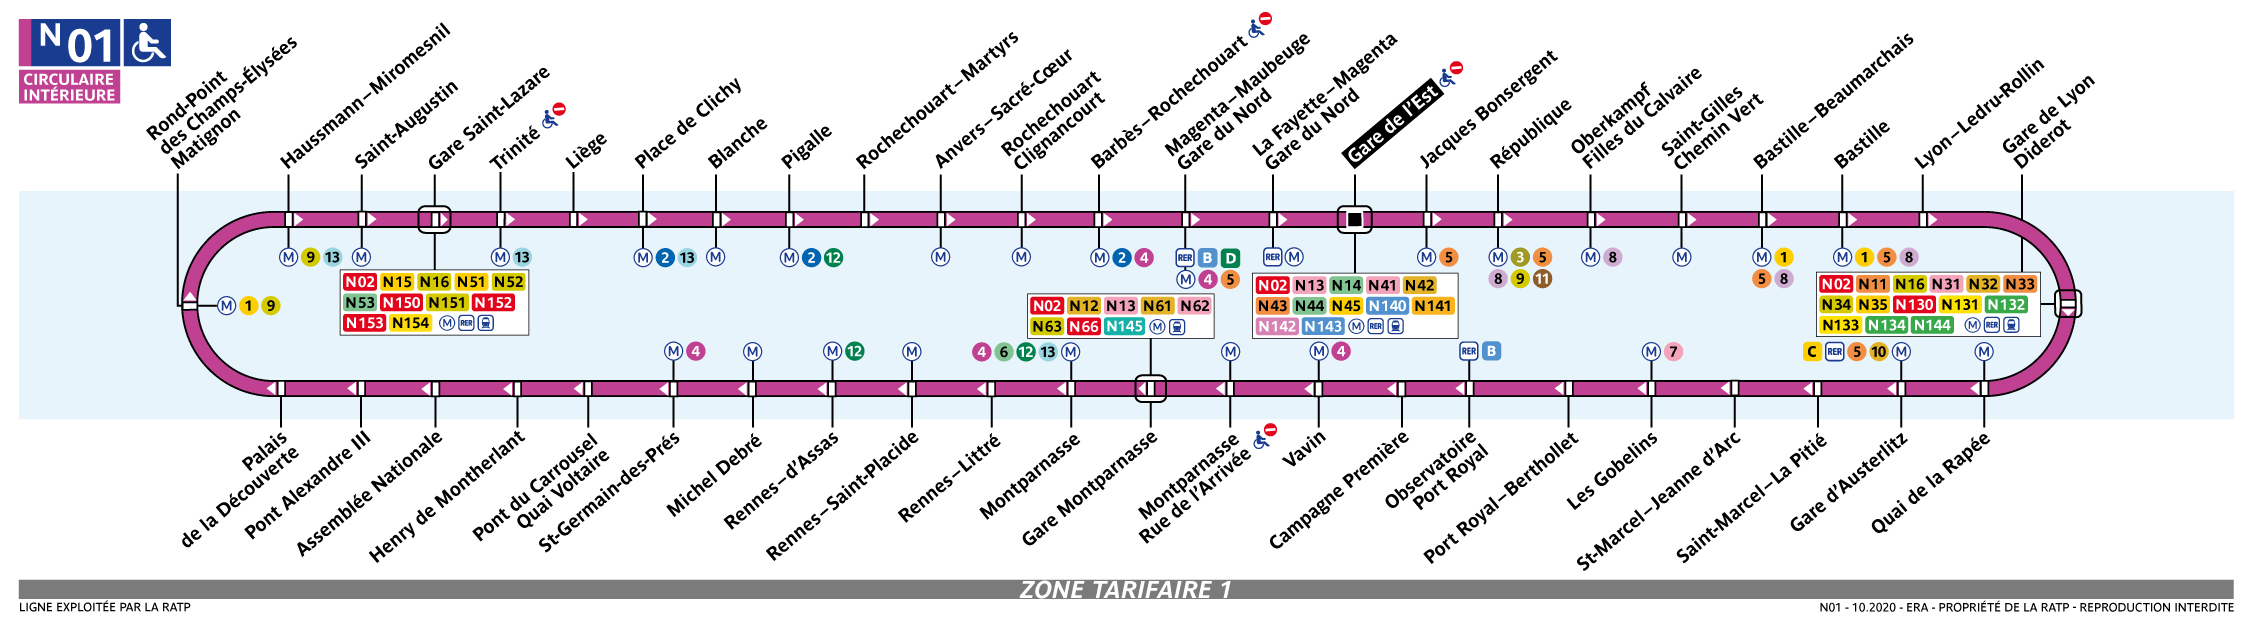 Line diagram showing the N01 bus route. It is displayed in a simple oval shape, with information about transfers but no street map